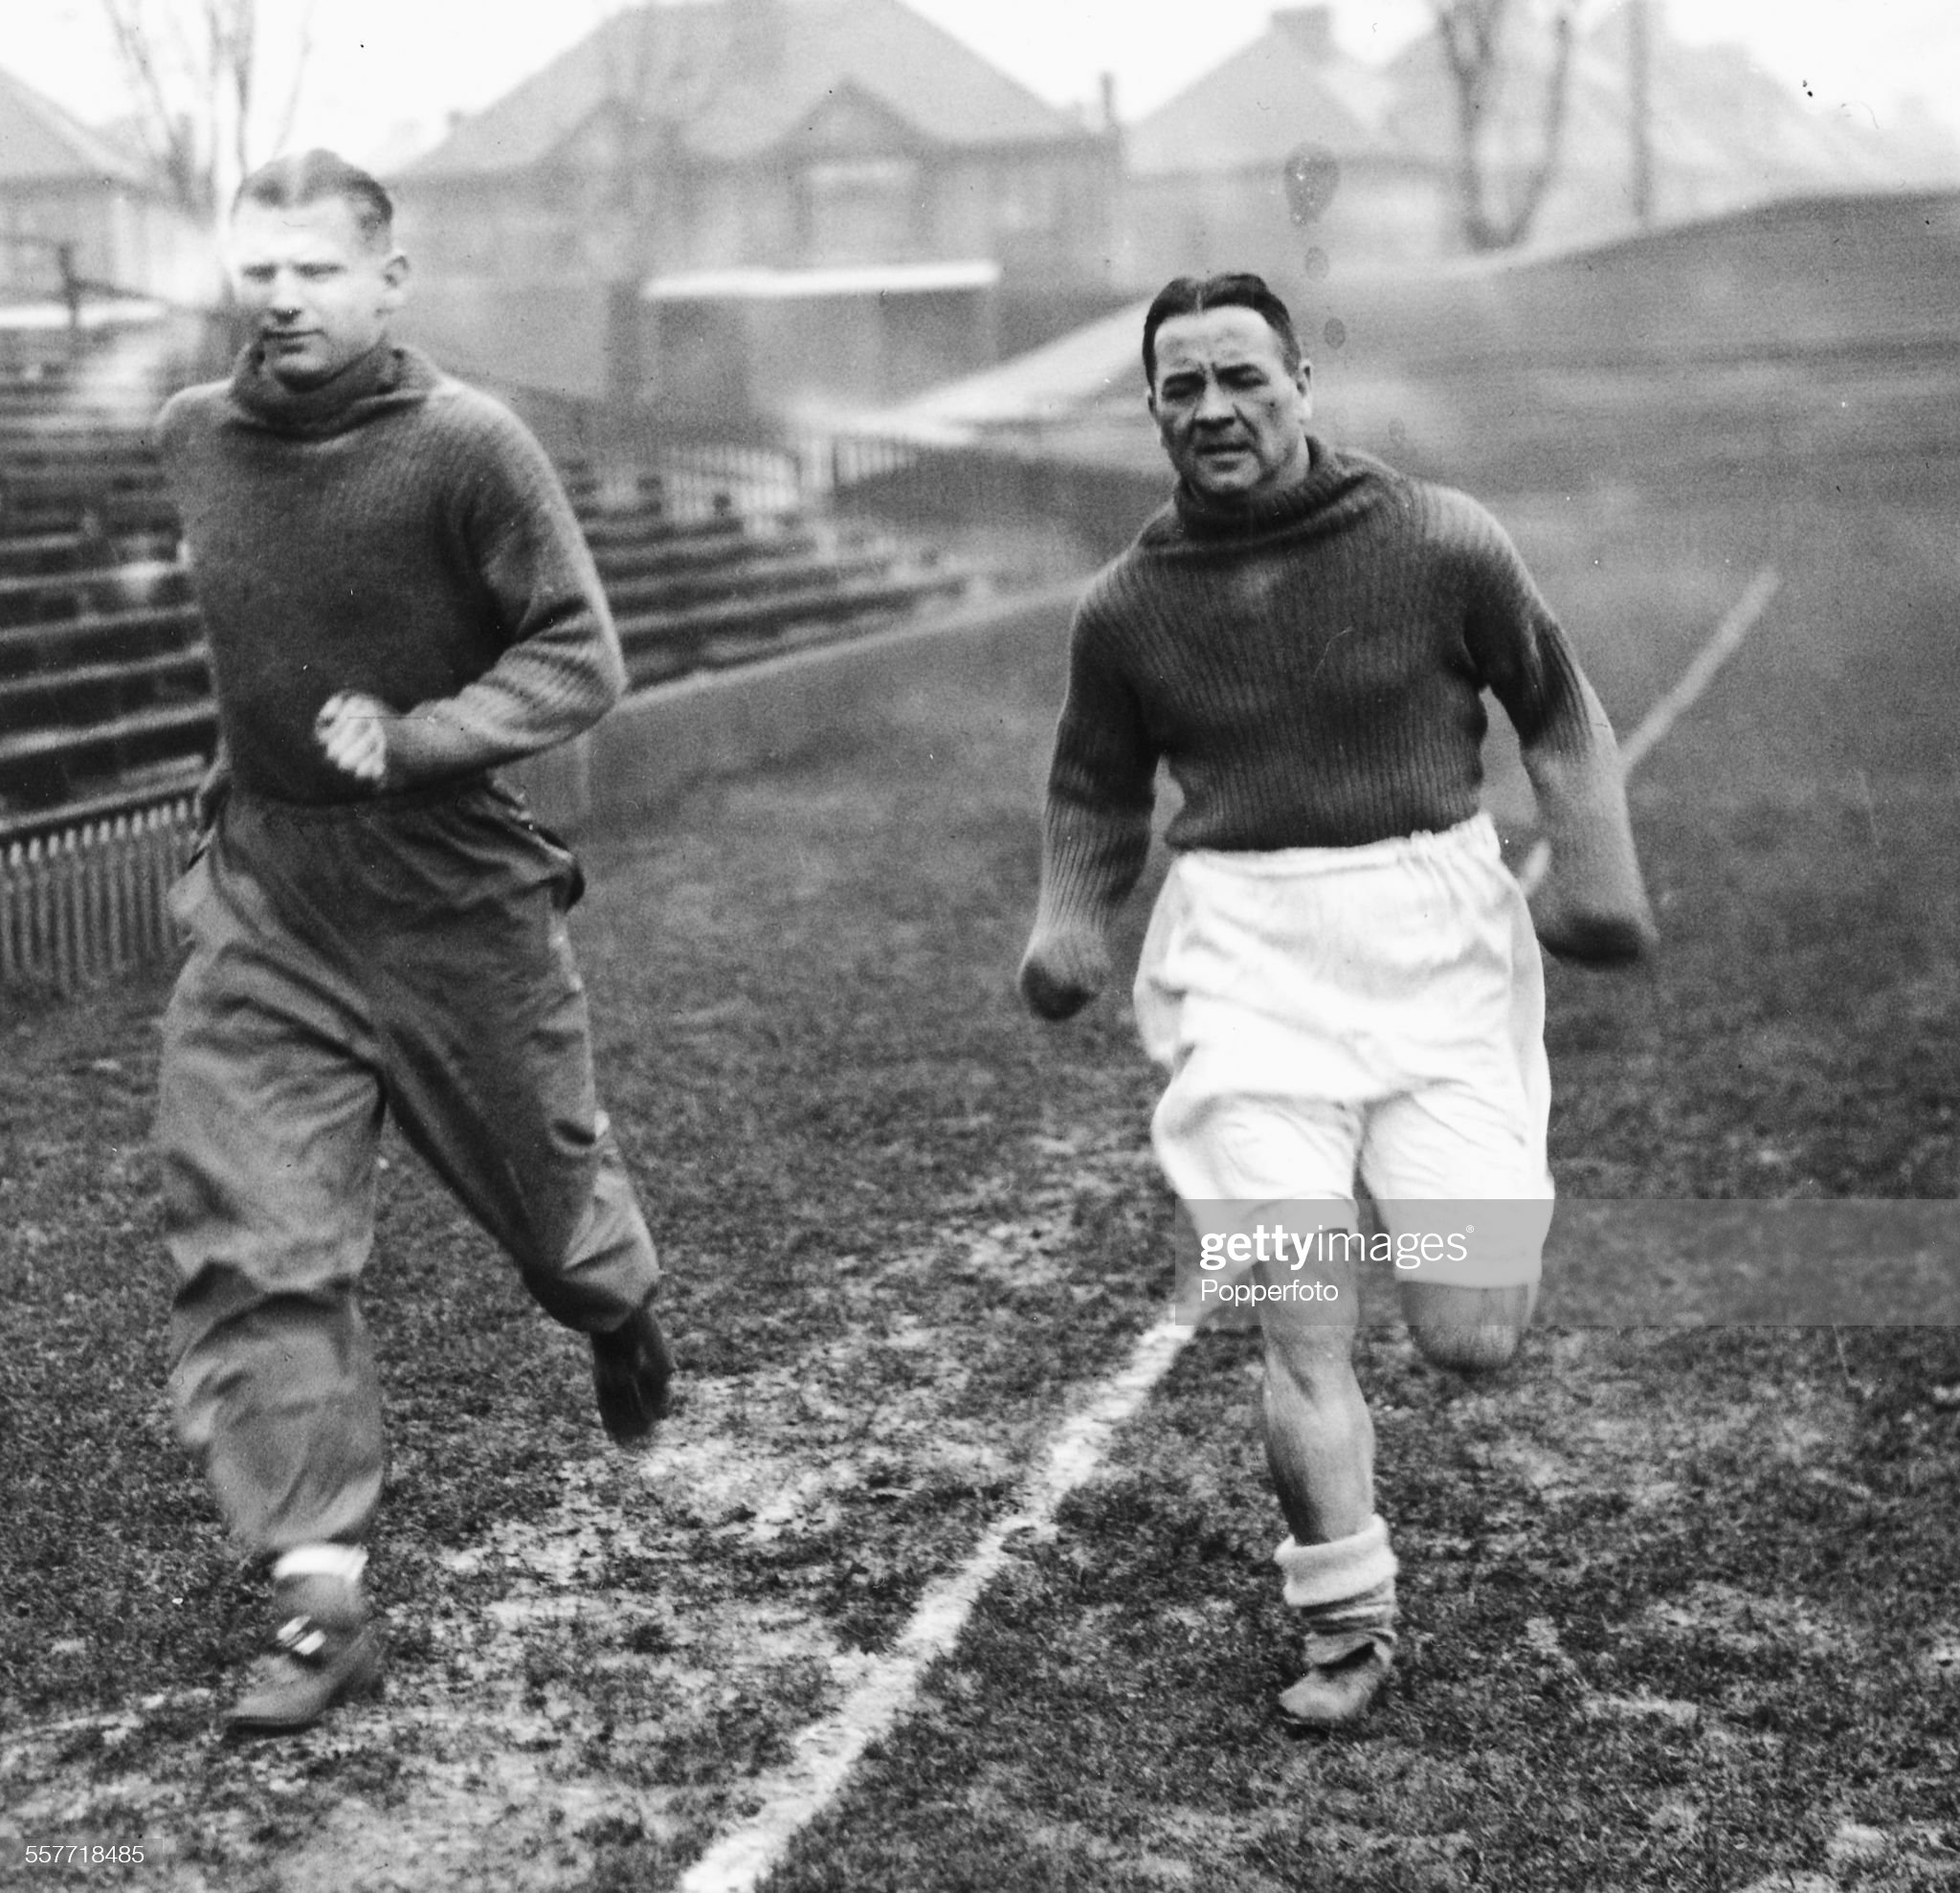 Arsenal football players Alex James (1901-1953) (right) and Cliff Bastin (1912-1991) (wearing waterproof trousers) running through the mud during training for the upcoming cup-tie in Brighton, England, circa 1935. (Photo by Popperfoto via Getty Images/Getty Images)